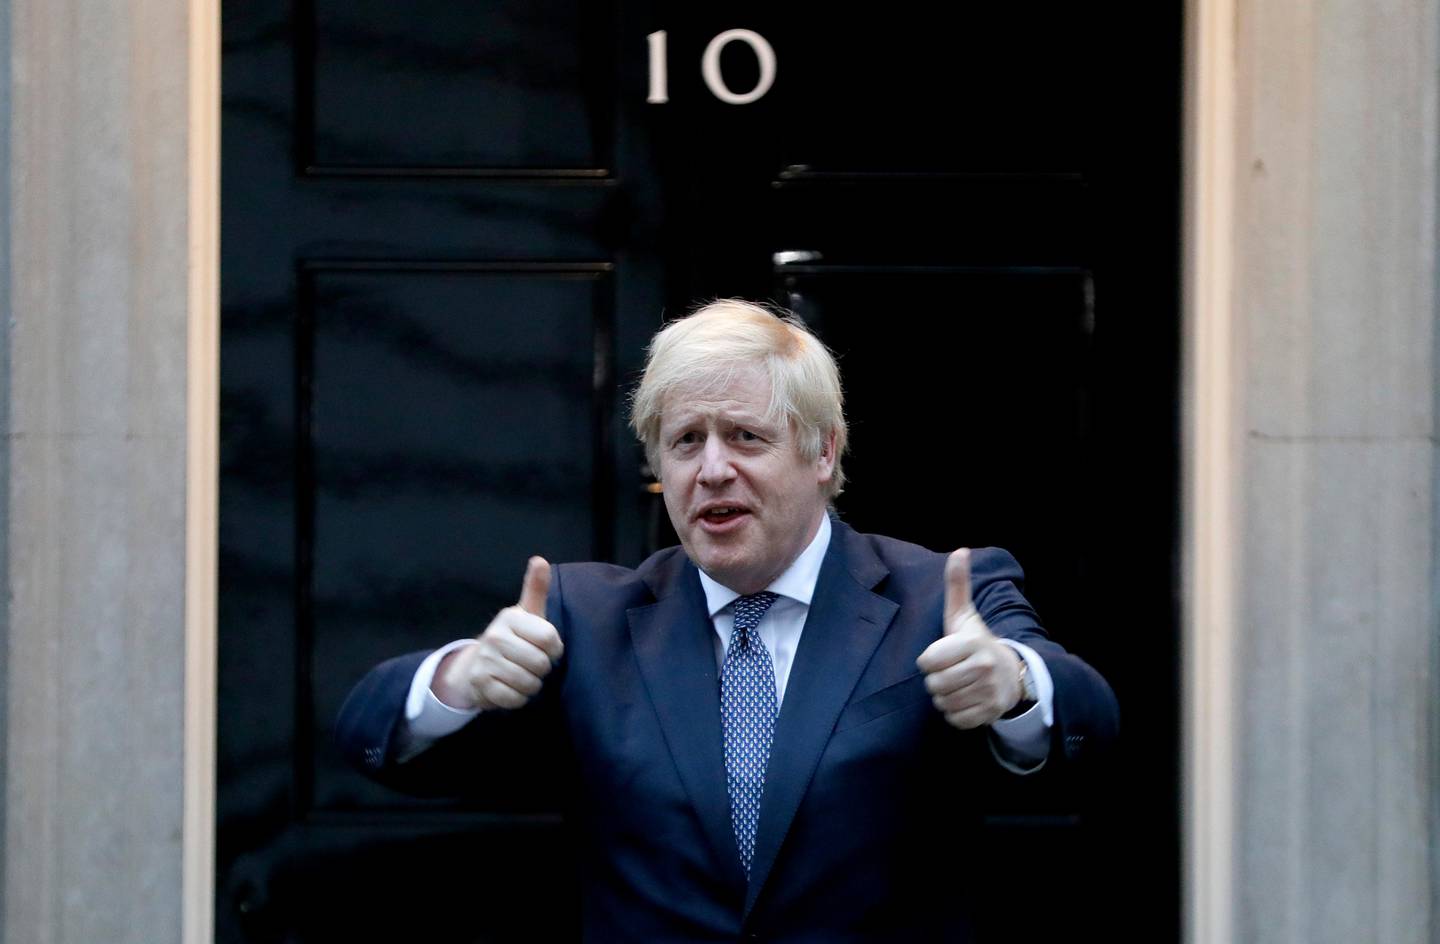 Britain's Prime Minister Boris Johnson shows thumbs up before he applauds on the doorstep of 10 Downing Street in London during the weekly "Clap for our Carers" Thursday, April 30, 2020. The COVID-19 coronavirus pandemic has prompted a public display of appreciation for care workers. The applause takes place across Britain every Thursday at 8pm local time to show appreciation for healthcare workers, emergency services, armed services, delivery drivers, shop workers, teachers, waste collectors, manufacturers, postal workers, cleaners, vets, engineers and all those helping people with coronavirus and keeping the country functioning while most people stay at home in the lockdown. (AP Photo/Kirsty Wigglesworth)